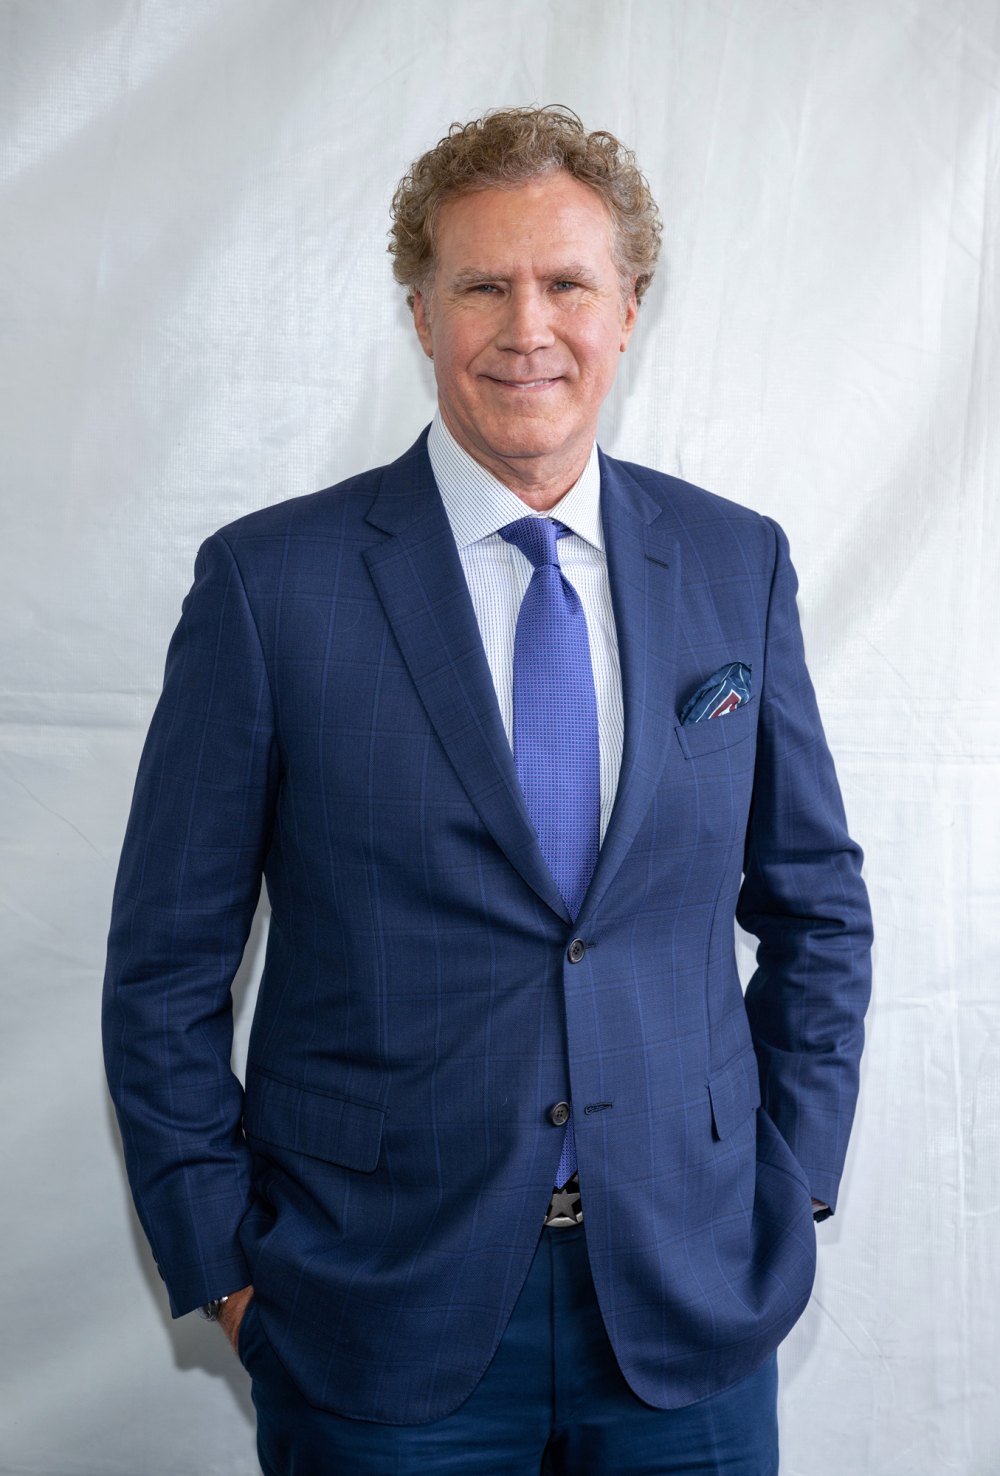 Will Ferrell Was Embarrassed By His Name